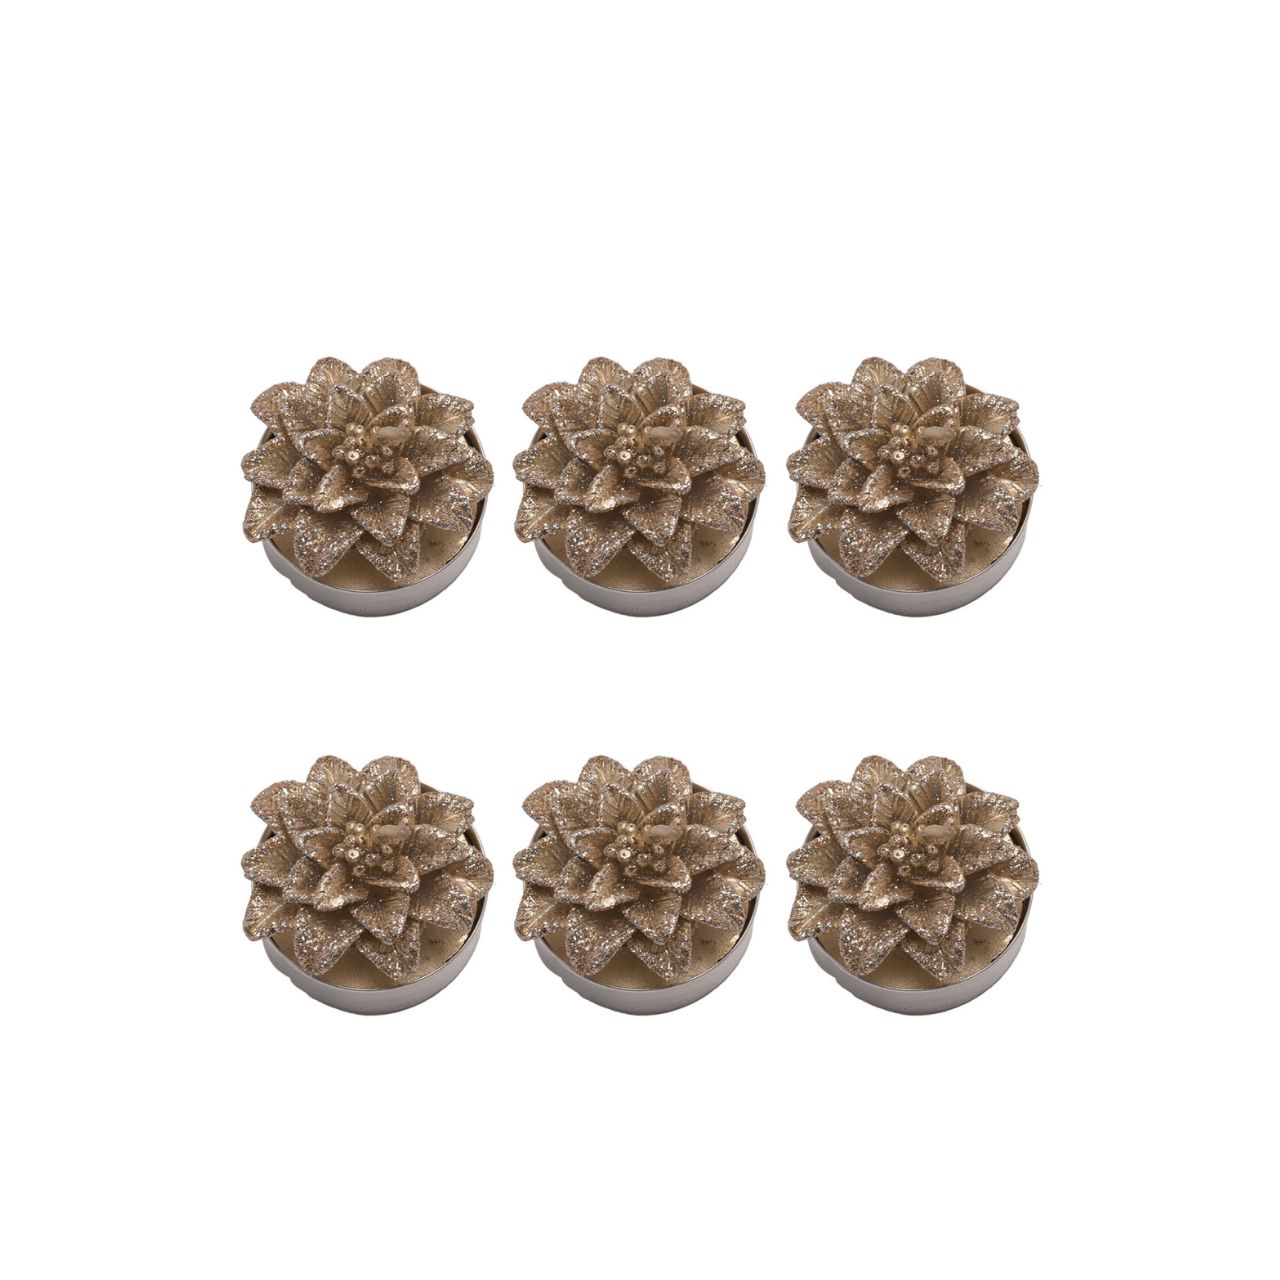 Gold Christmas Poinsettia Tealights Set of 6  A set of 6 gold poinsettia tea lights from THE SEASONAL GIFT CO.  These glittering tea lights are an adorable addition to homes during the festive season.